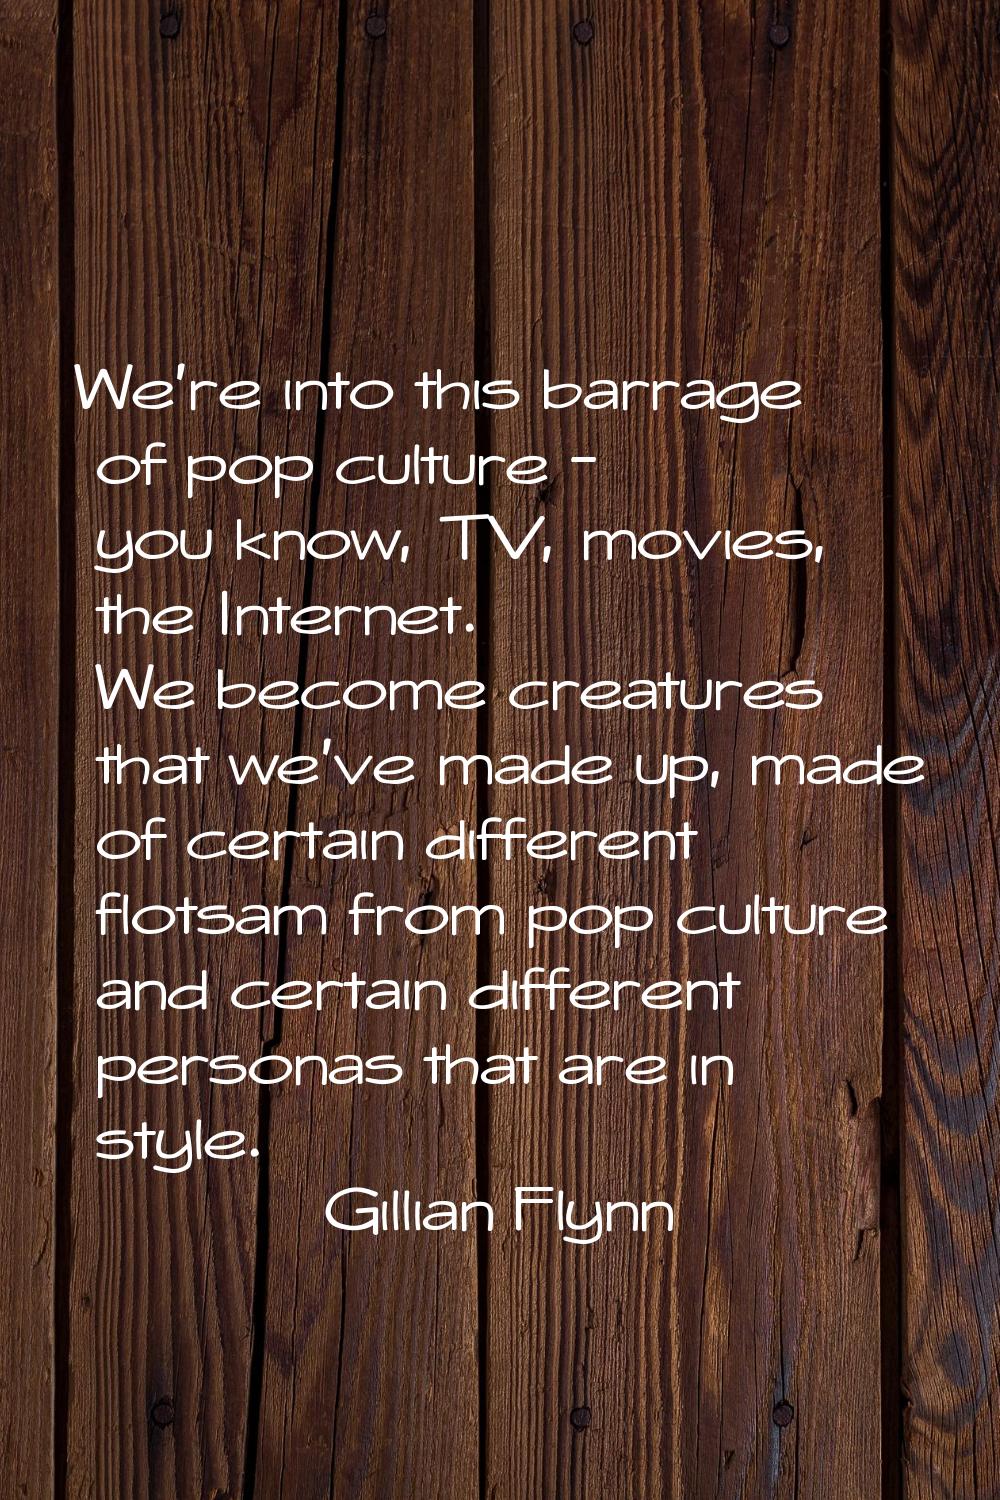 We're into this barrage of pop culture - you know, TV, movies, the Internet. We become creatures th